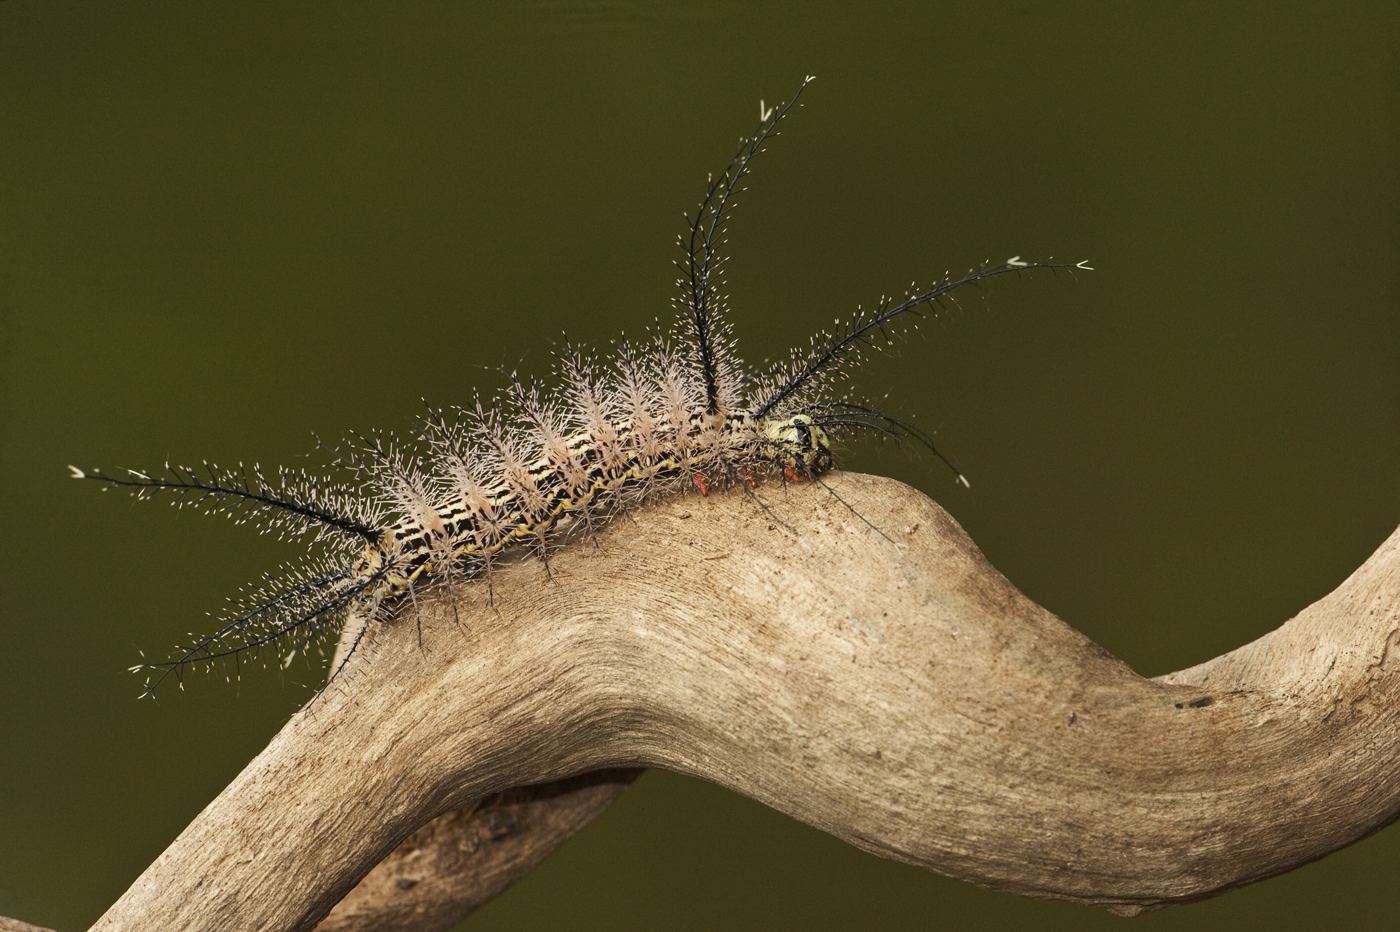 Moth Caterpillar with well deveolped appendages with urticating hairs.
Rainforest
Rewa River
GUYANA. South America